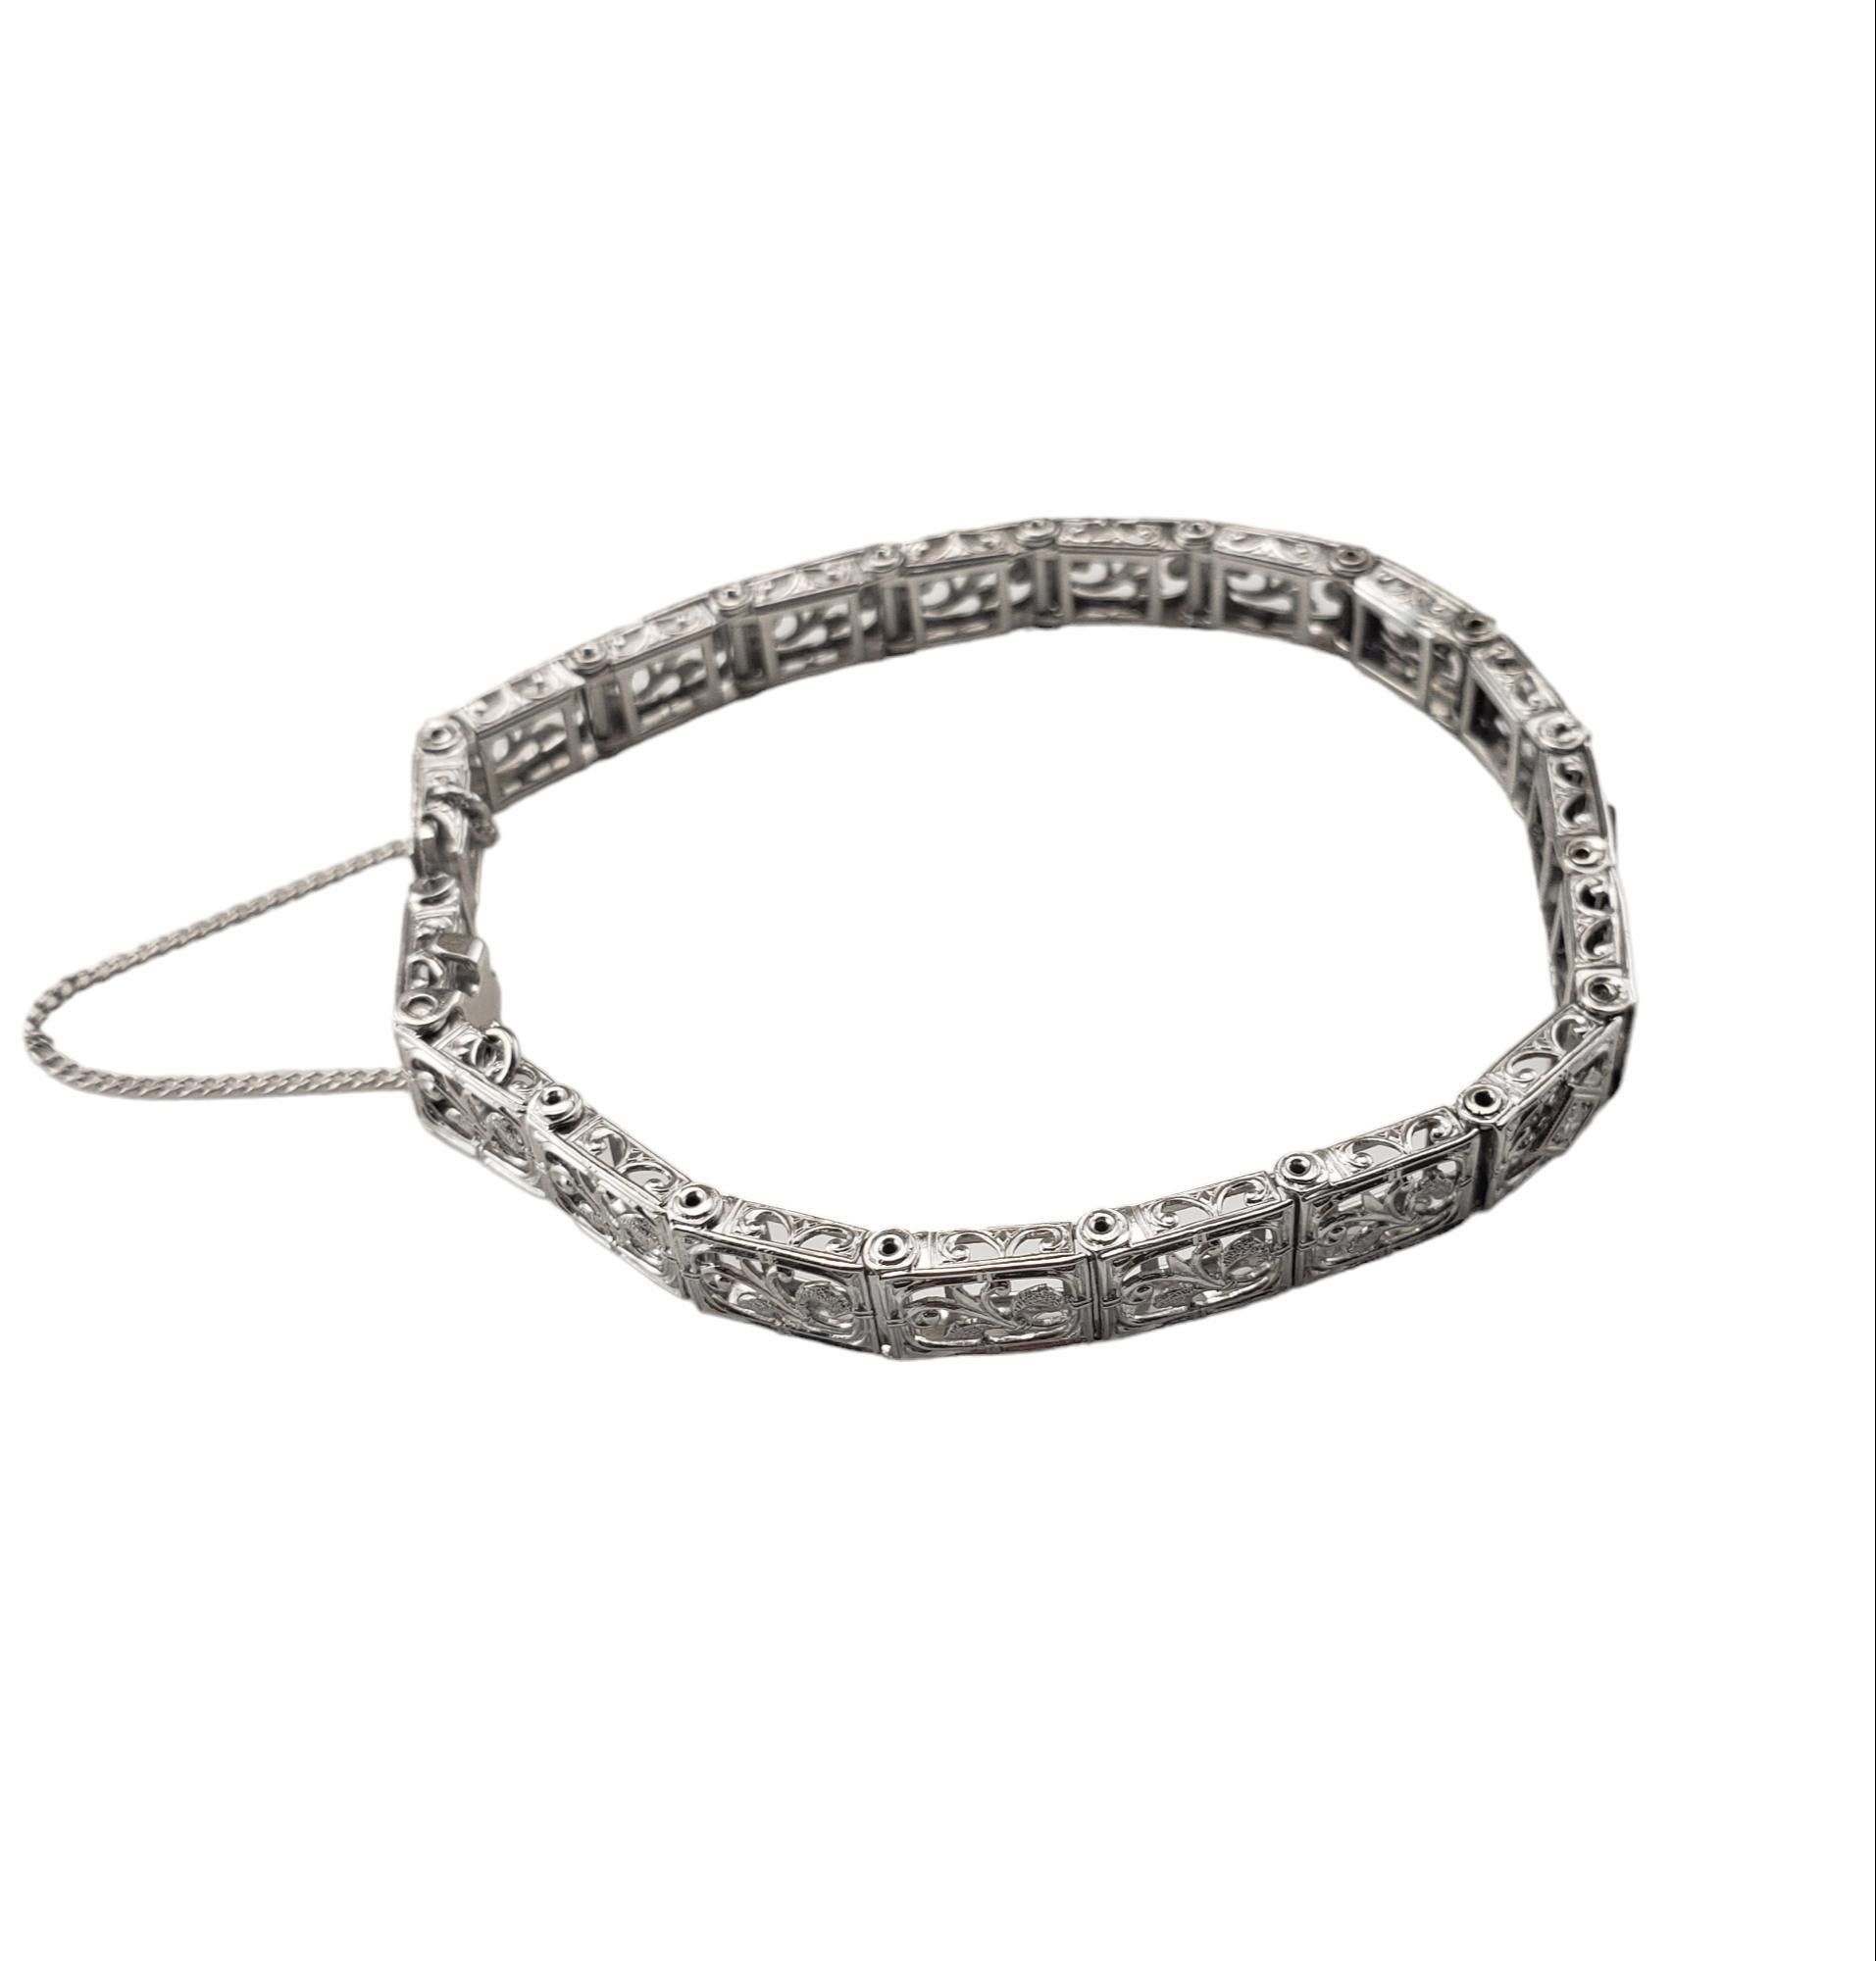 14 Karat White Gold and Diamond Bracelet #15523 In Good Condition For Sale In Washington Depot, CT